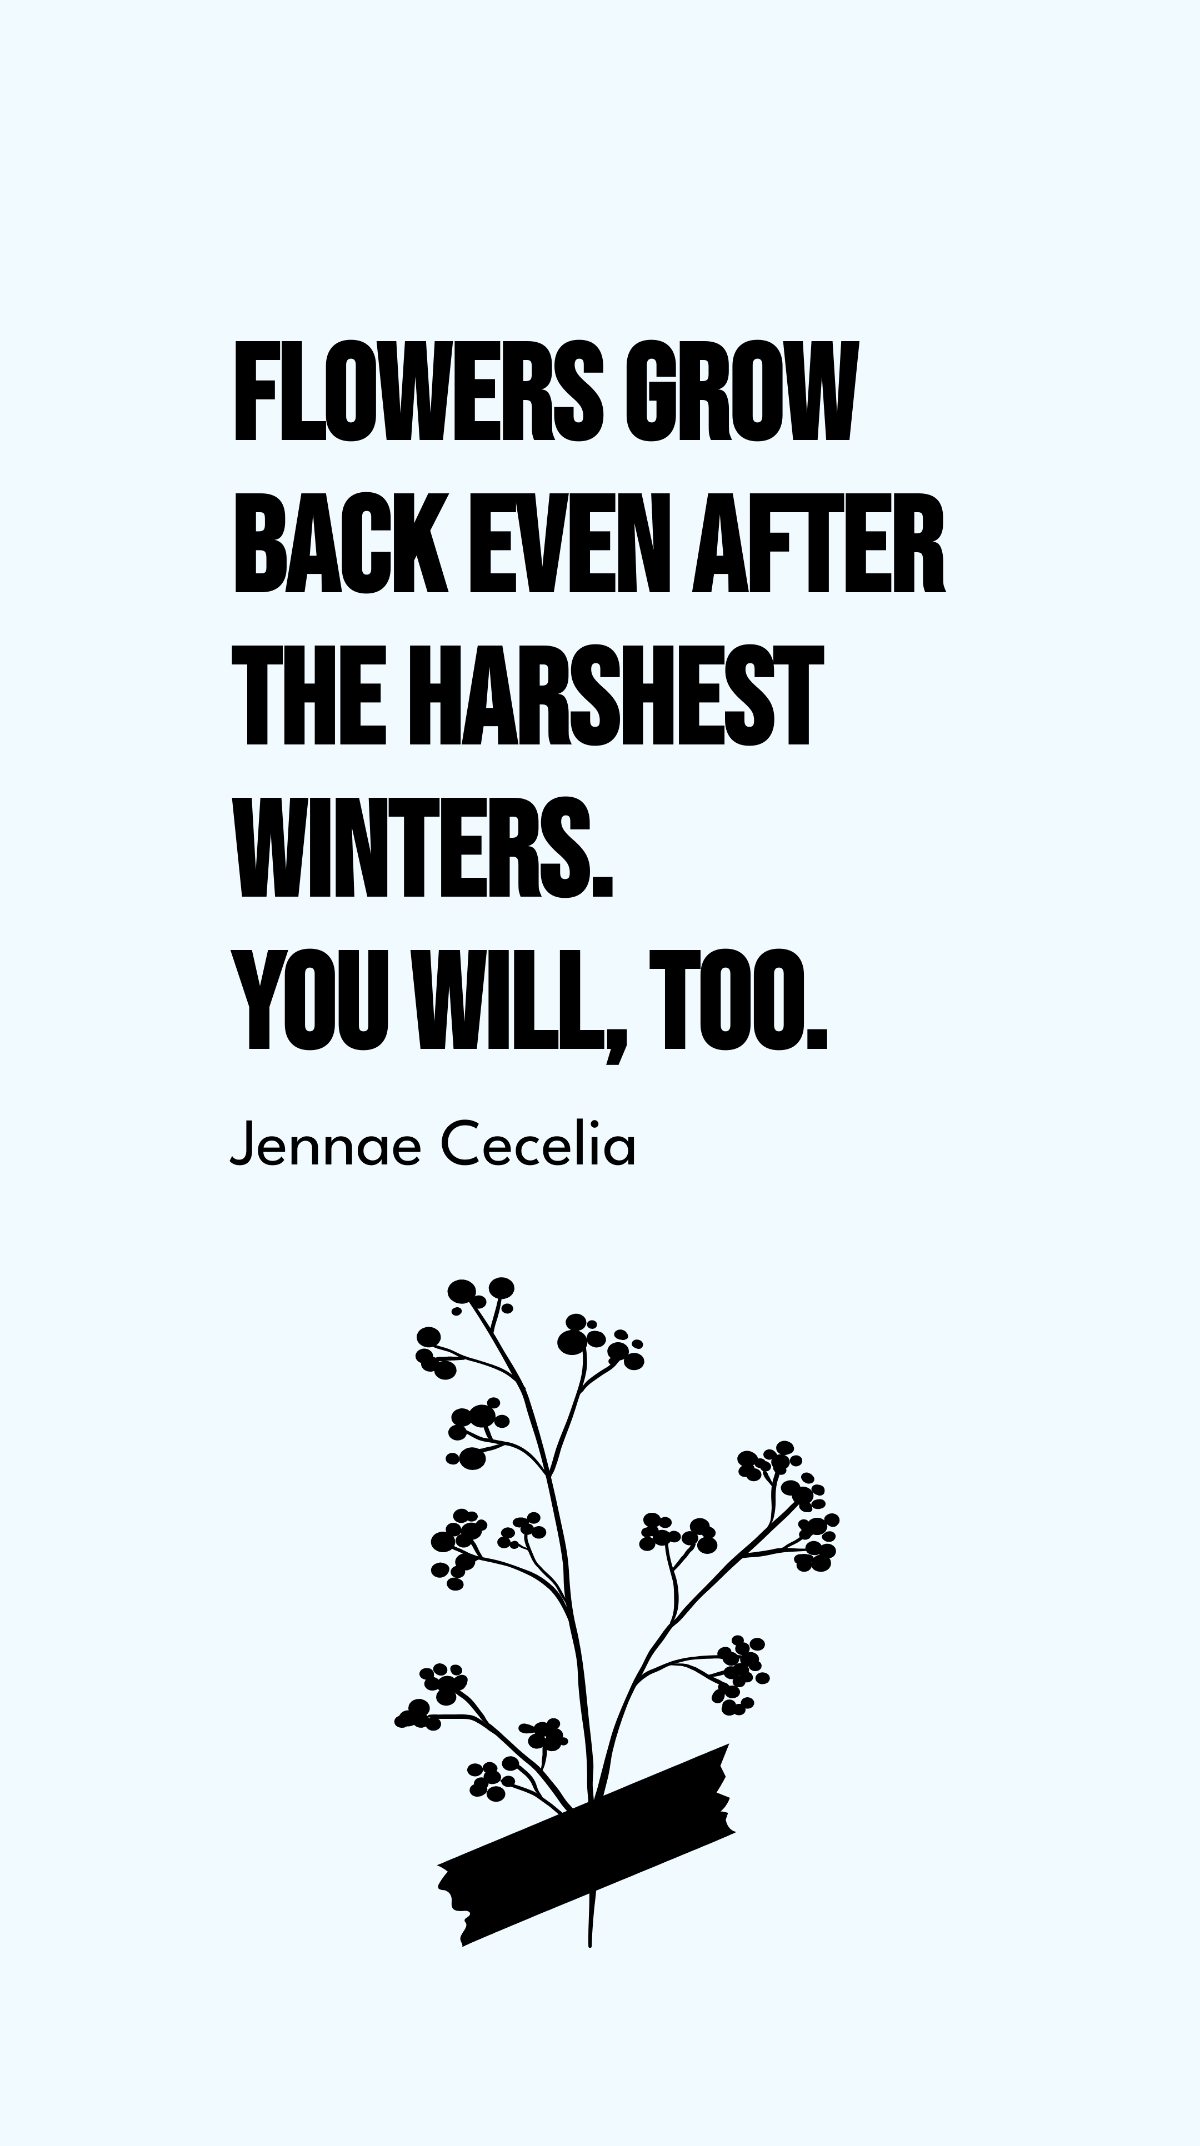 Jennae Cecelia - Flowers grow back even after the harshest winters. You will, too.